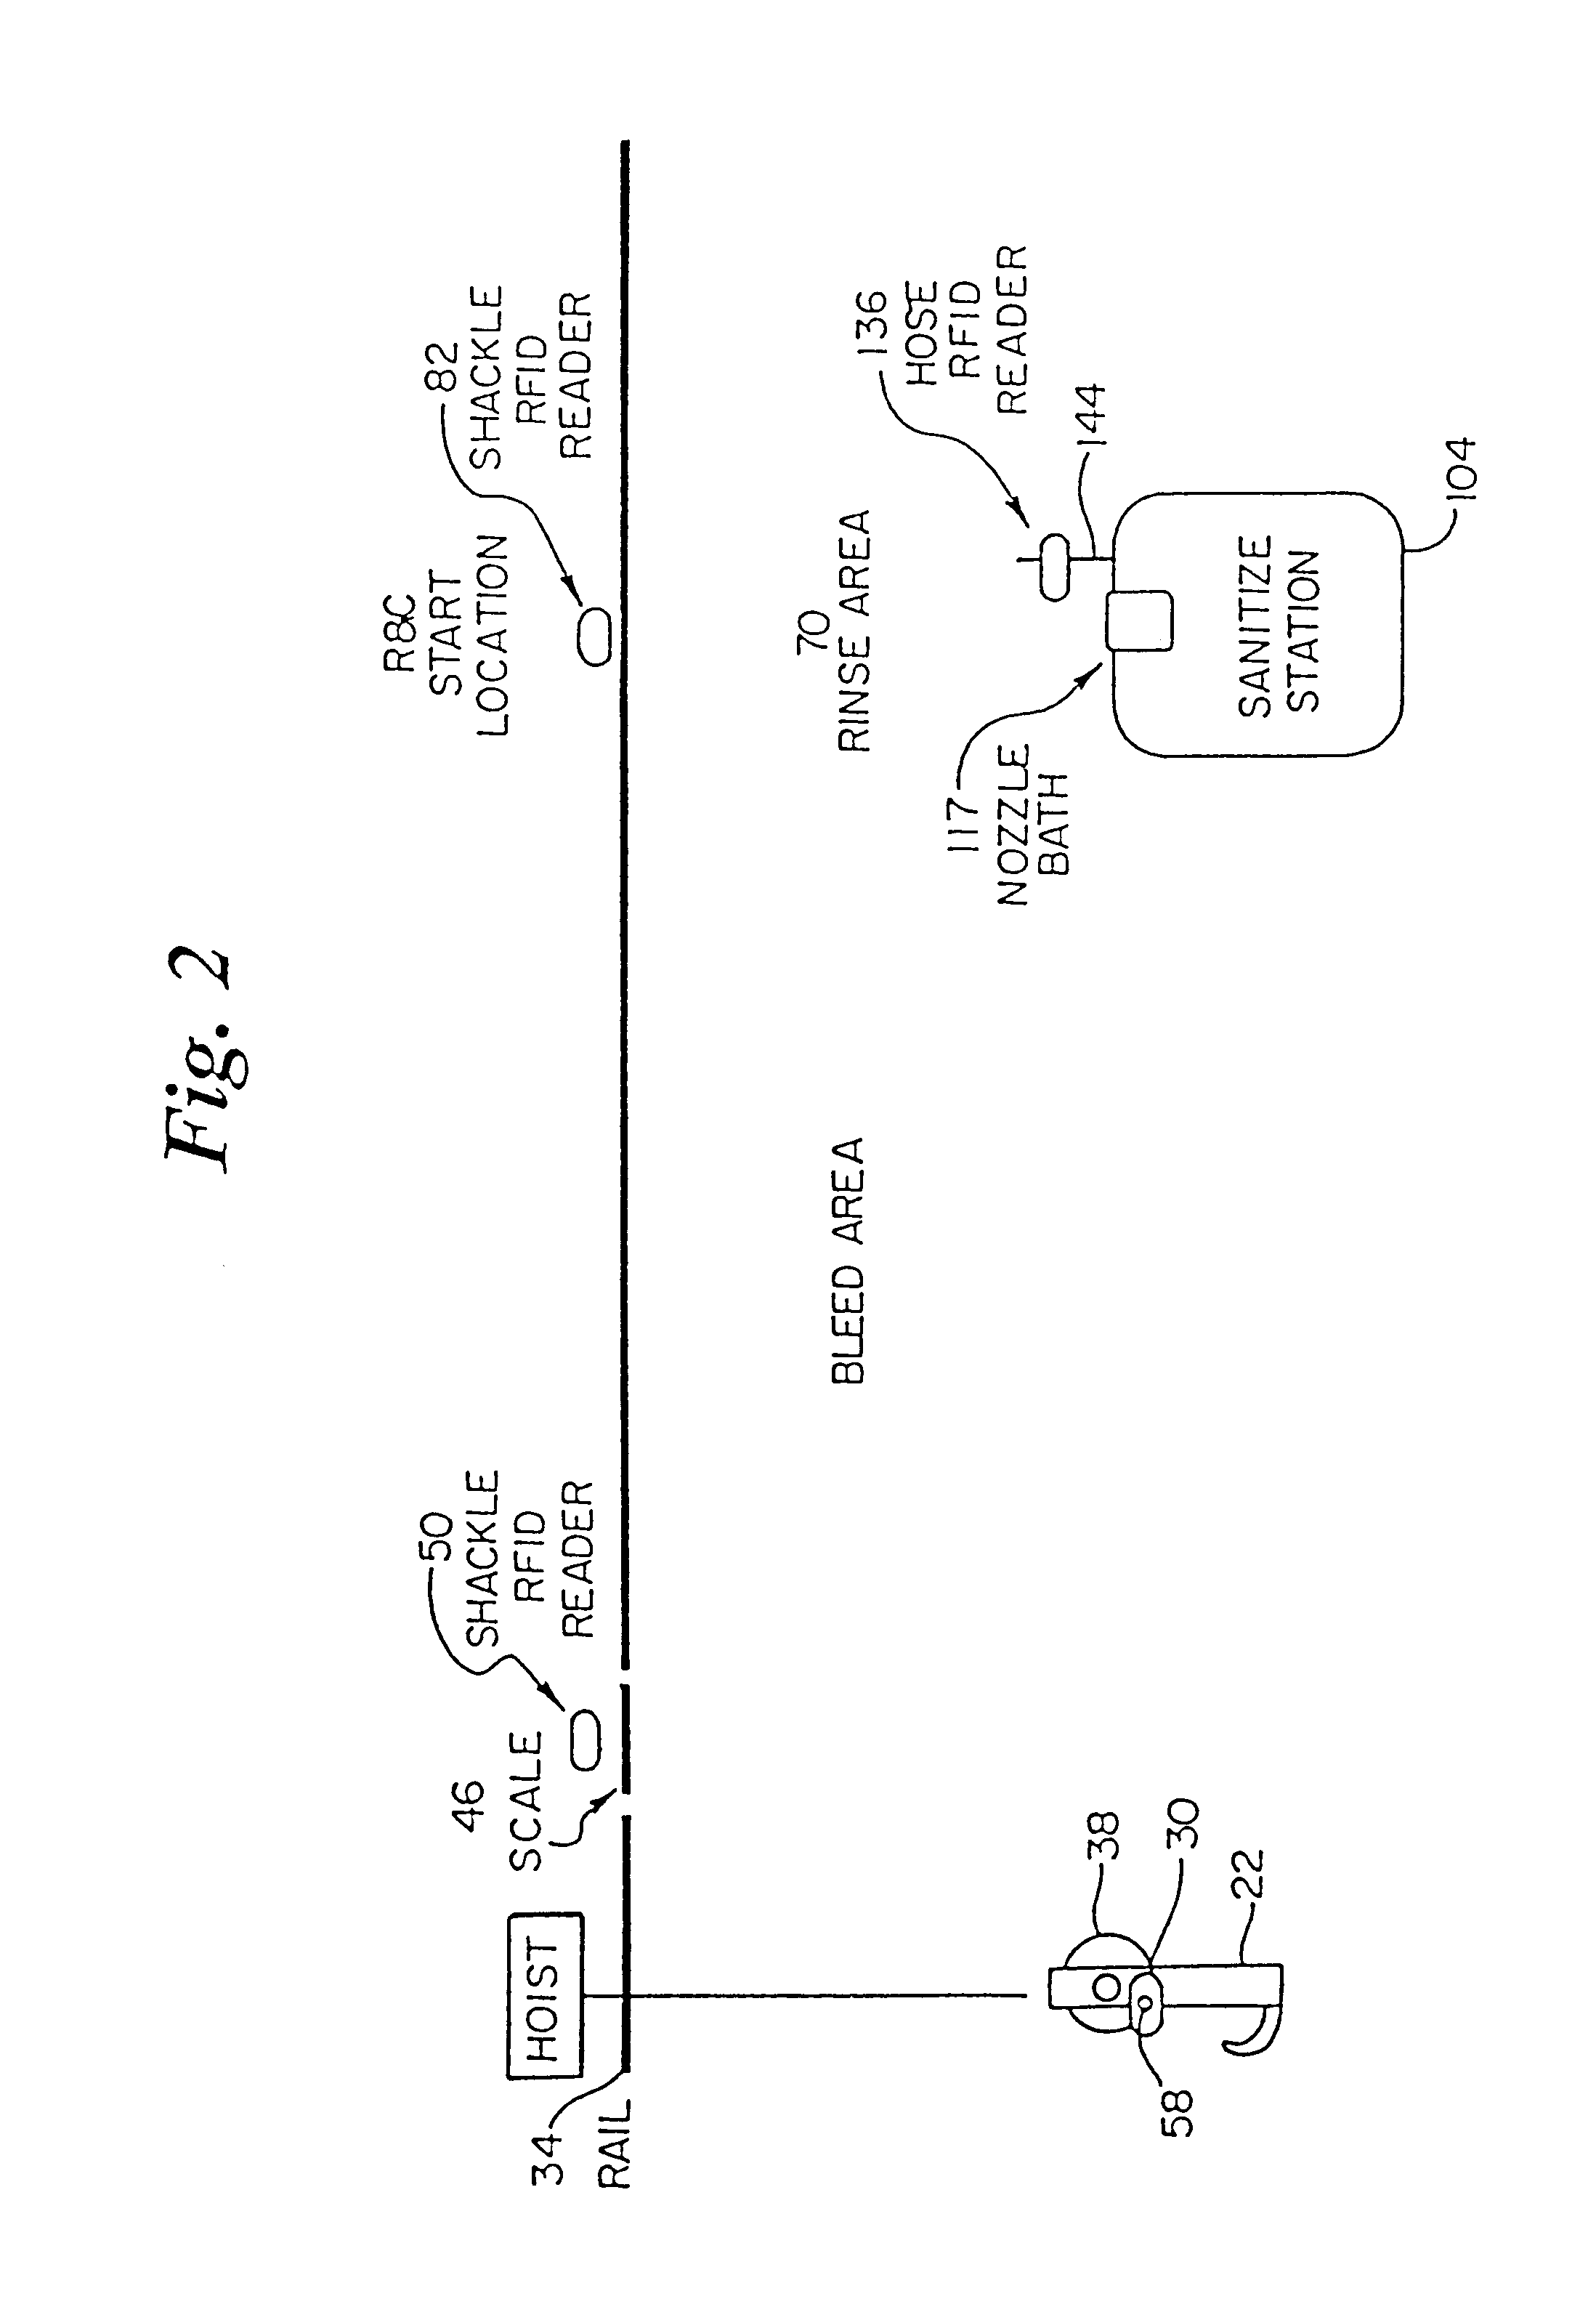 Method for making a radio frequency identification device